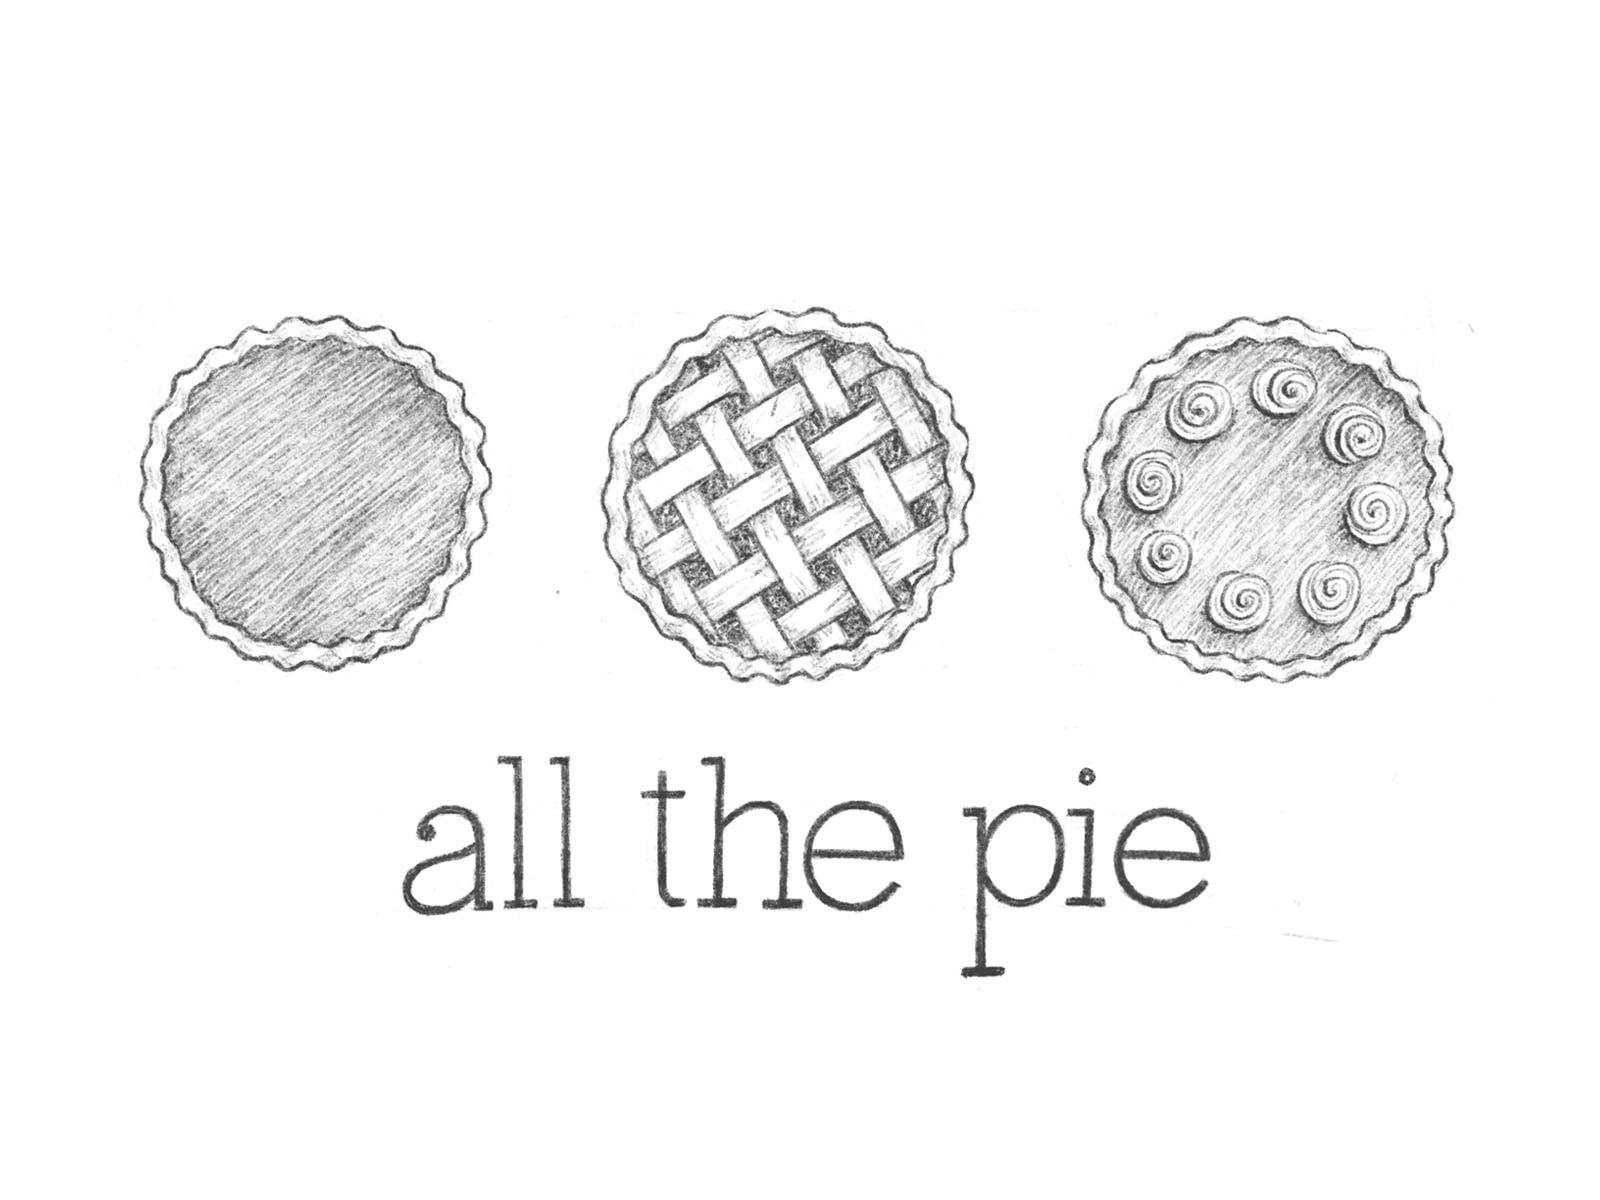 all-the-pie-by-bre-mccallum-on-dribbble